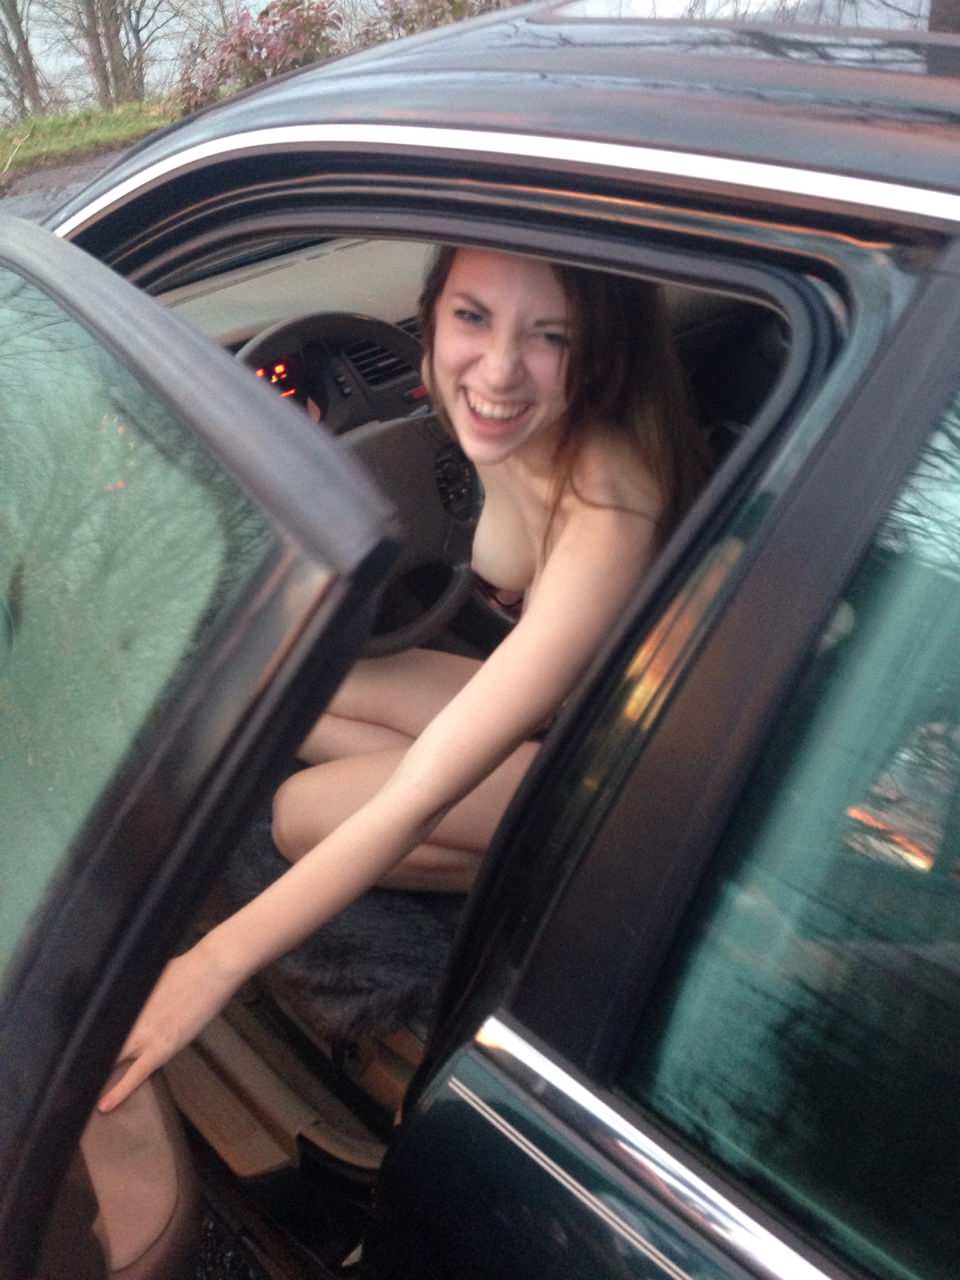 Caught naked in her car Porn Pic - EPORNER